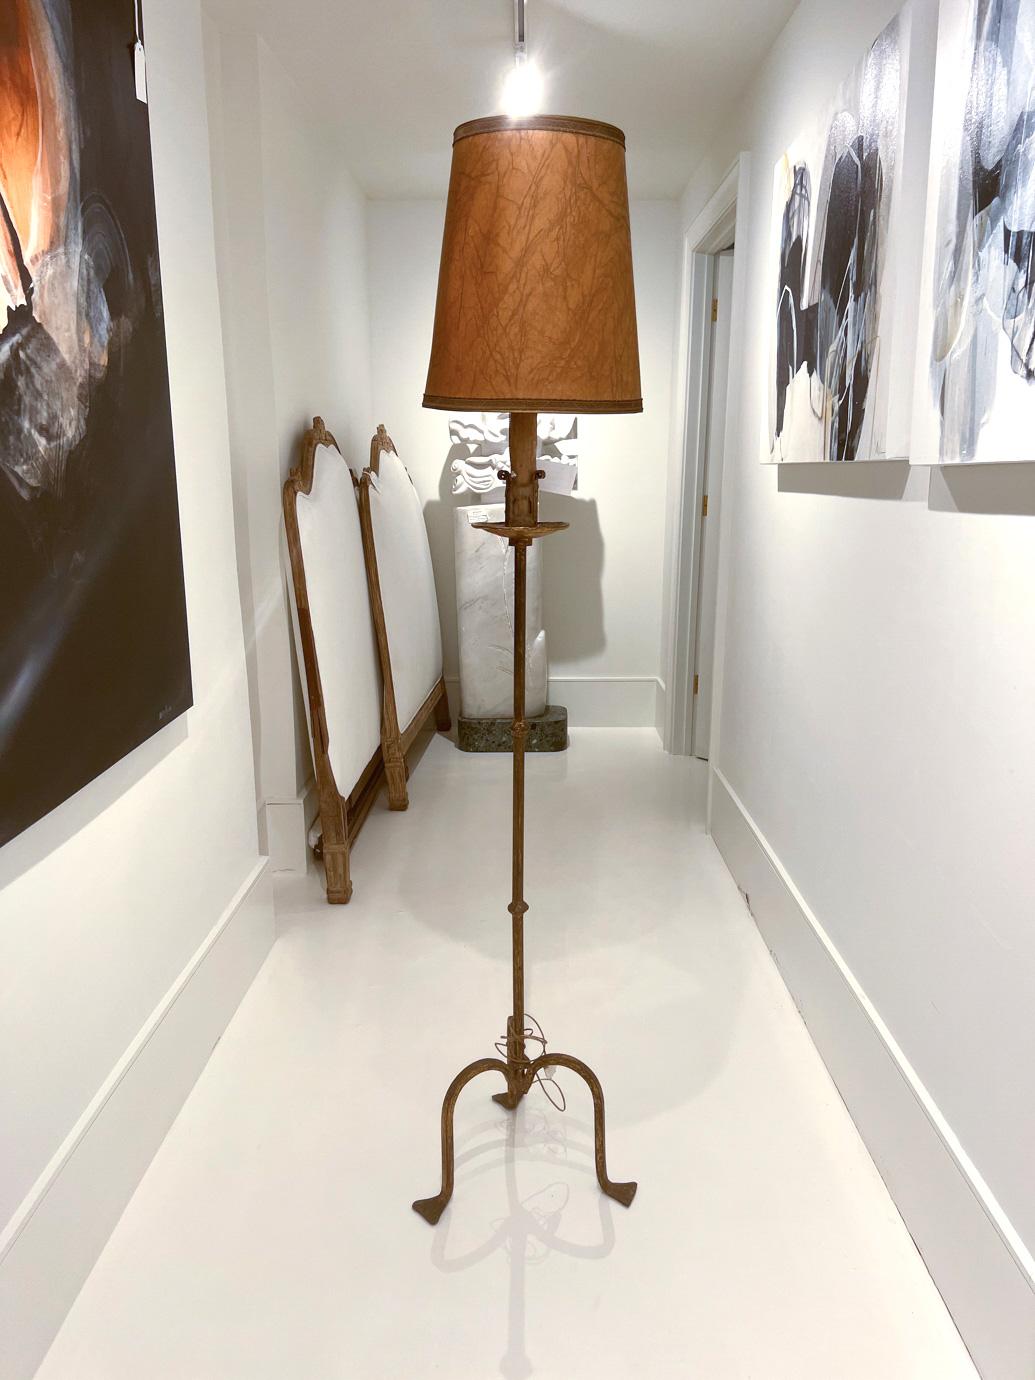 This lamp has endless opportunities in any decor. It will fit in anywhere due to its slender profile and graceful base. The candle at the top is artfully fashioned with real wax drippings. European wiring will need to be upgraded.